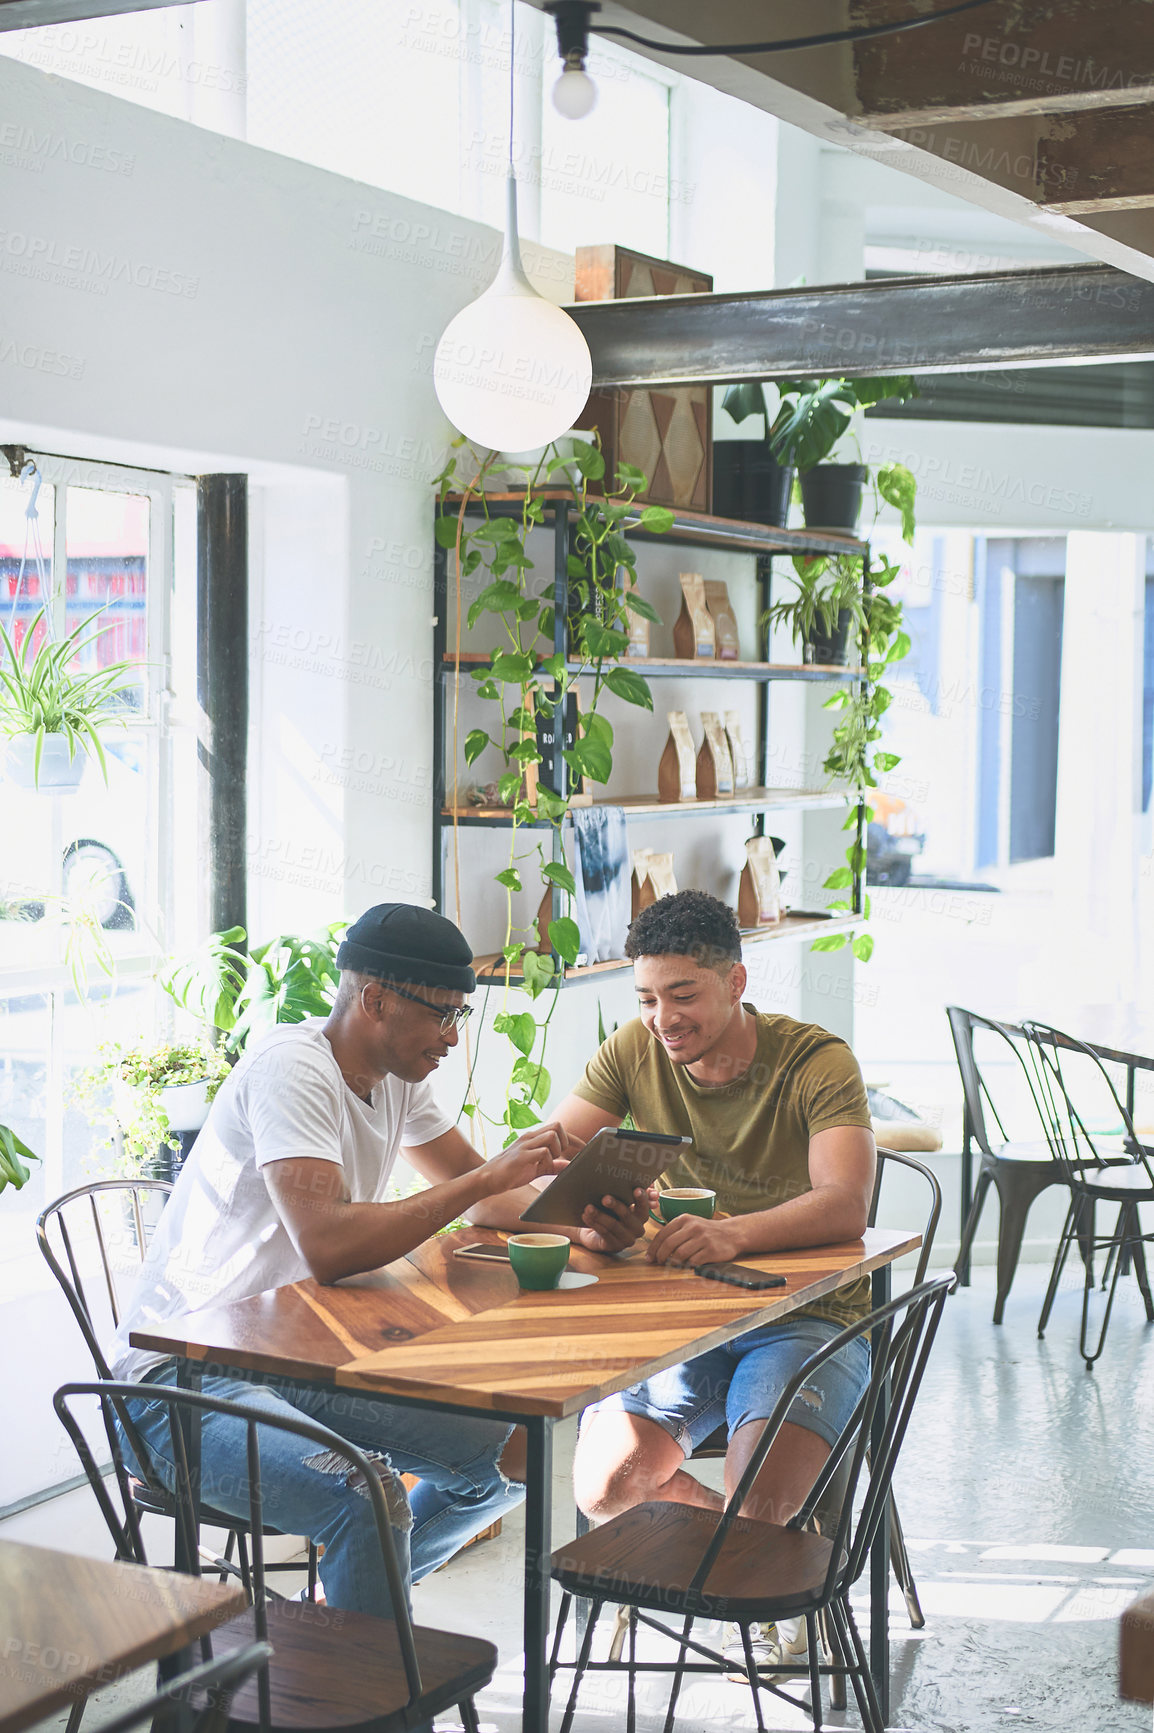 Buy stock photo Cropped shot of two handsome friends sitting together and bonding over a coffee in a cafe during the day